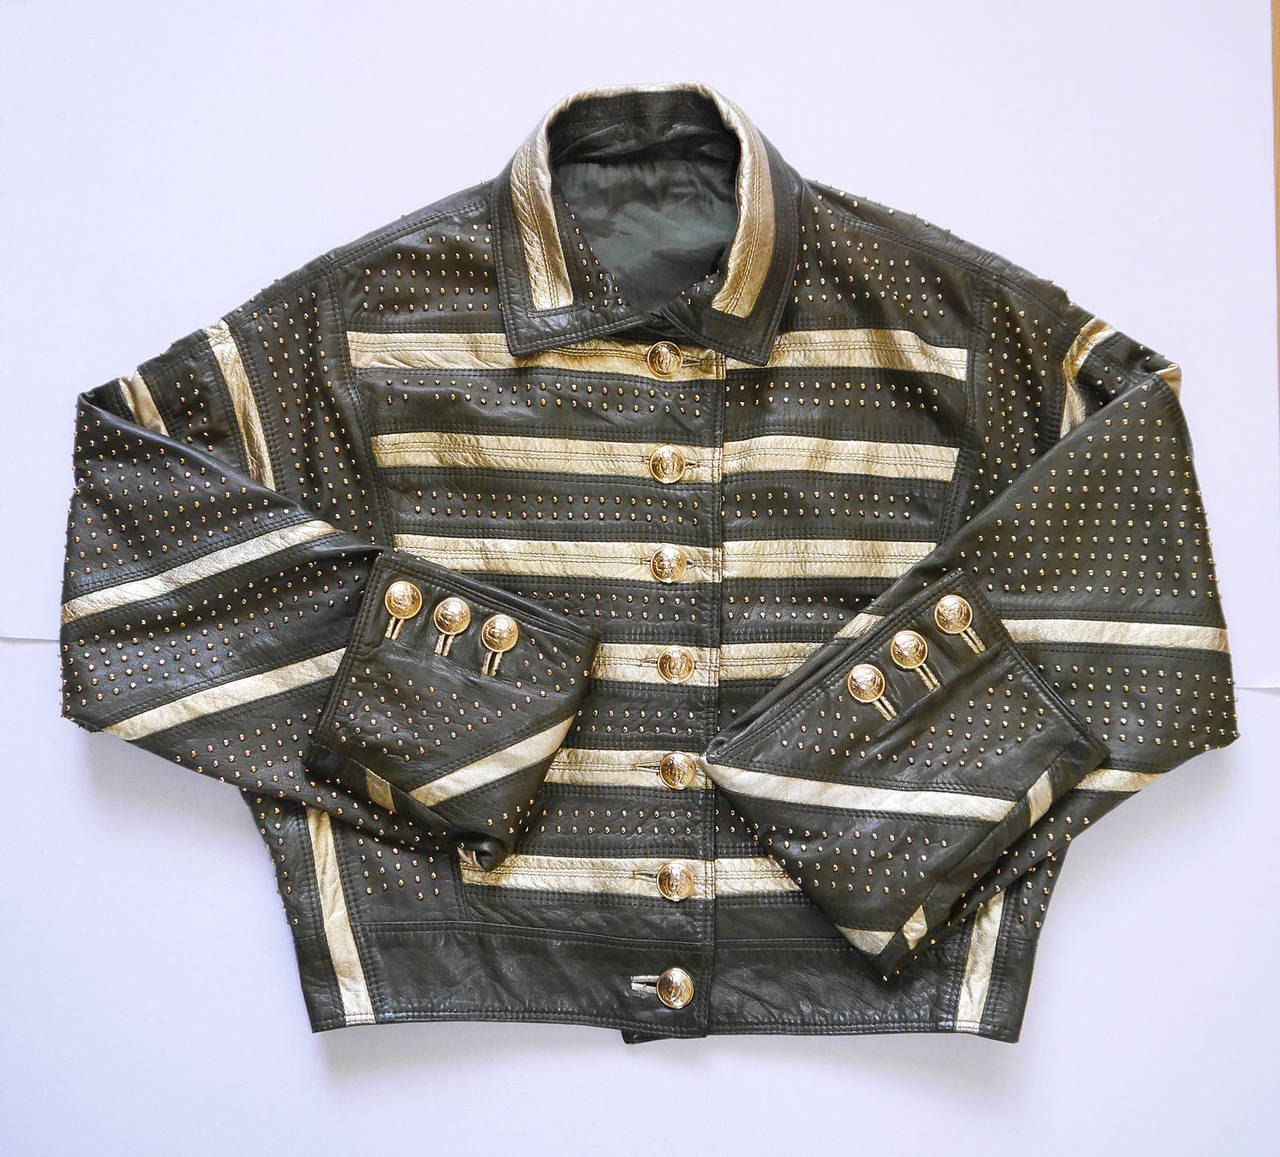 Rare Gianni Versace Gold Striped Leather Jacket With Studs Spring 1992 In Excellent Condition For Sale In W1, GB